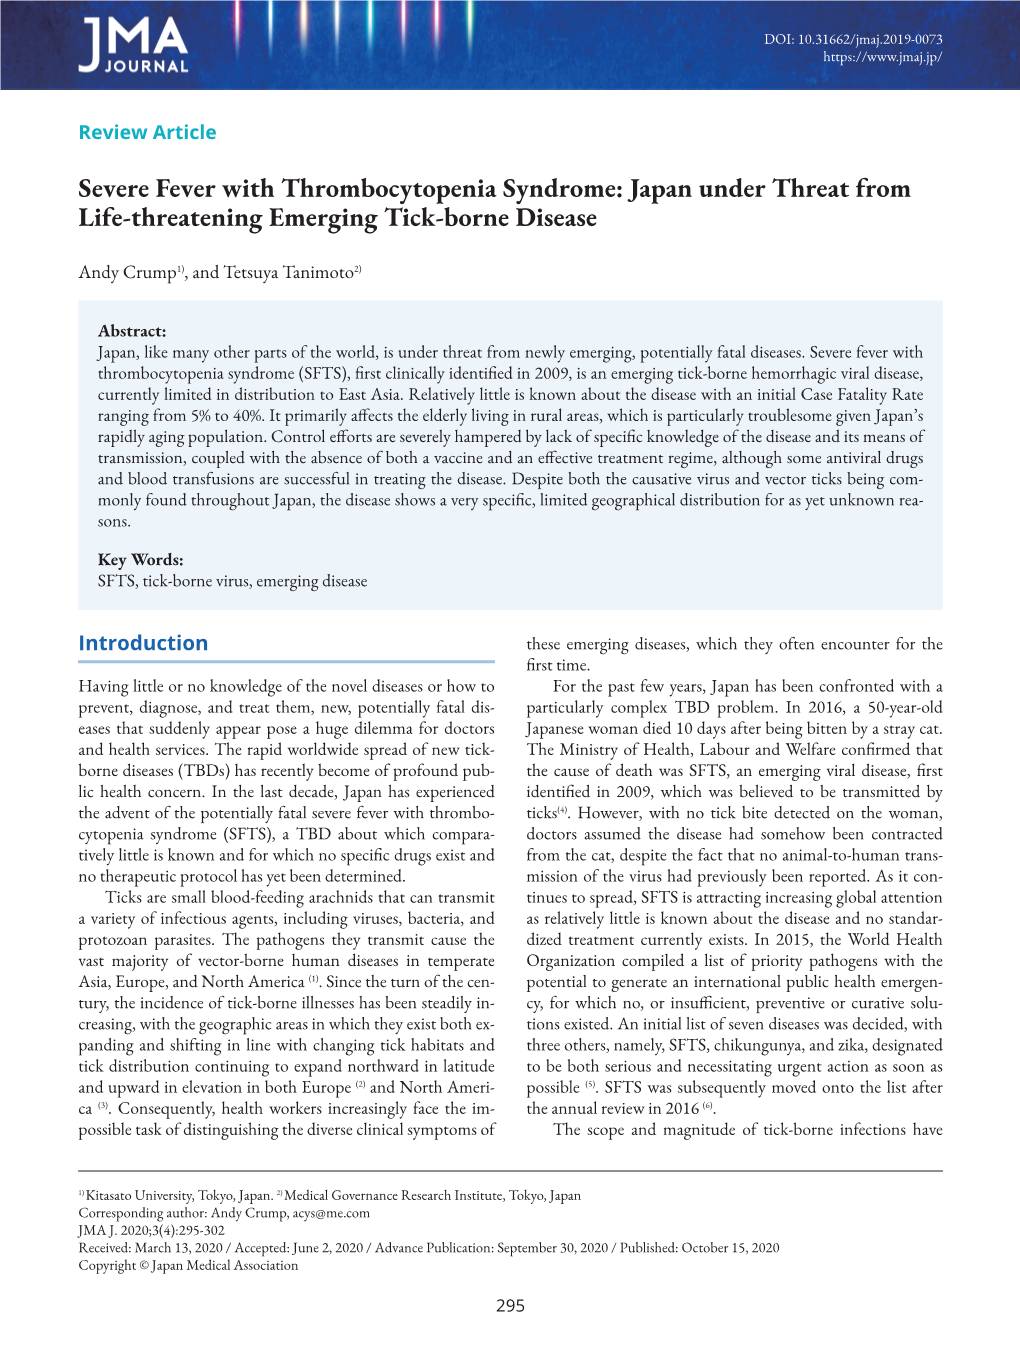 Severe Fever with Thrombocytopenia Syndrome: Japan Under Threat from Life-Threatening Emerging Tick-Borne Disease